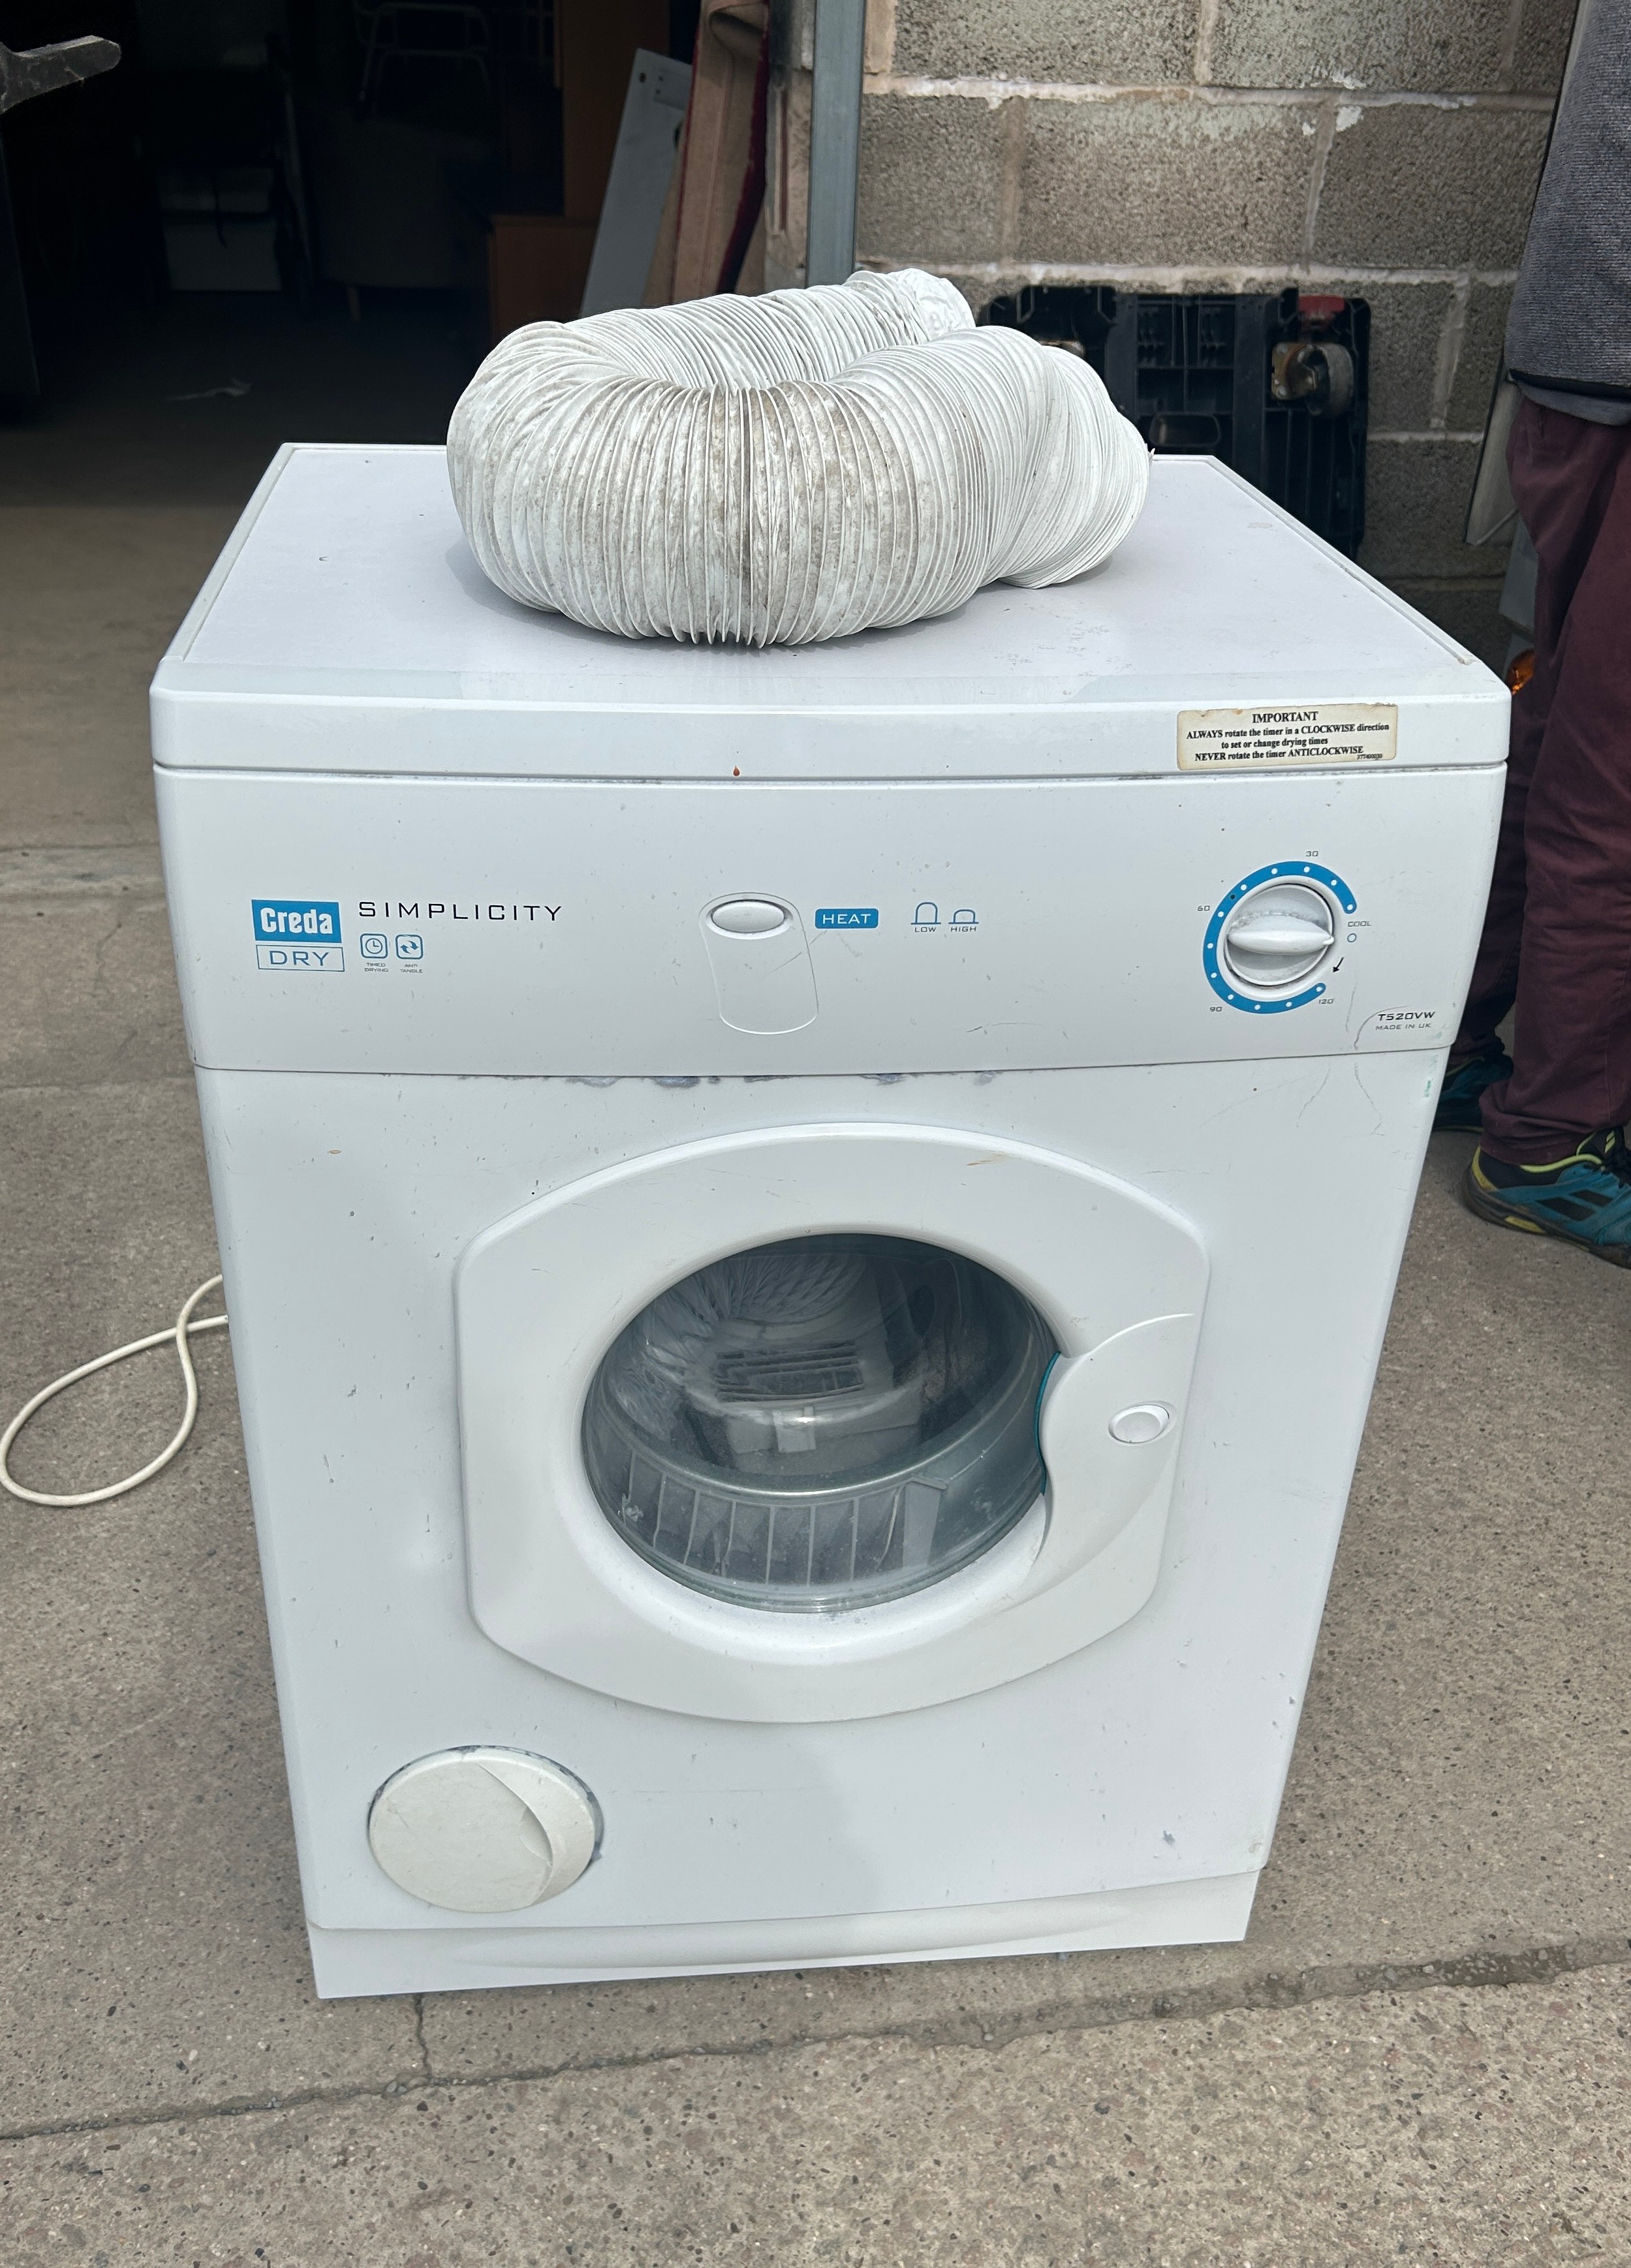 Creda dry tumble dryer in working order